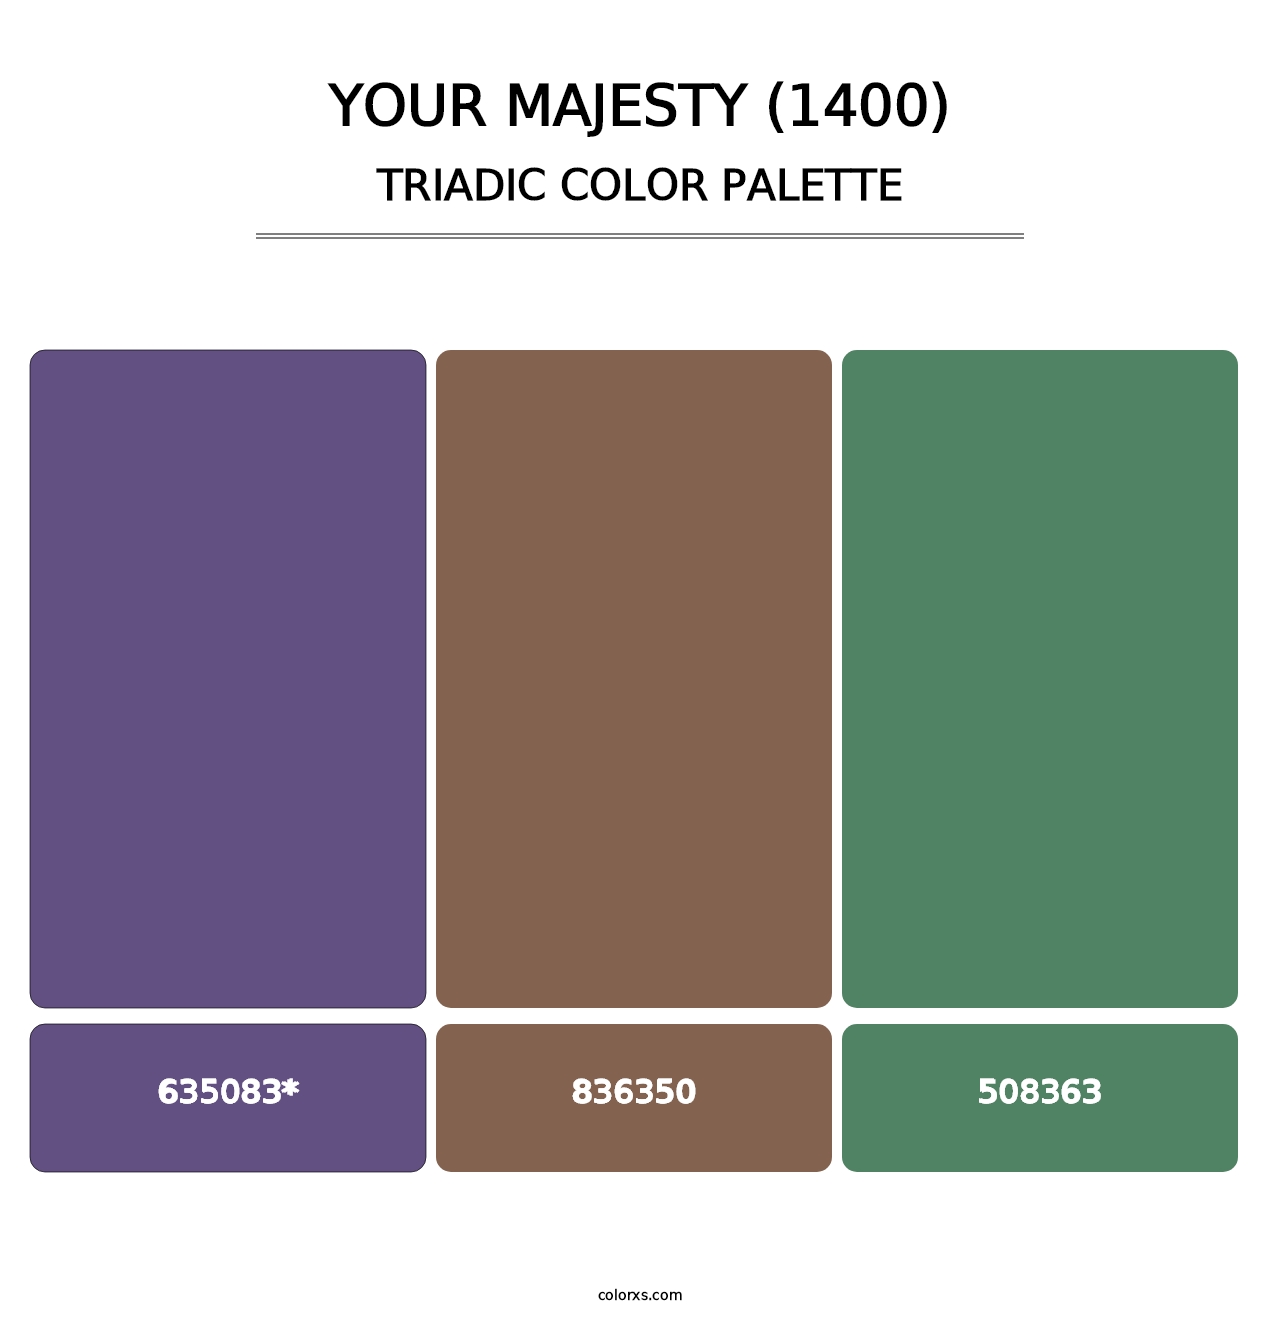 Your Majesty (1400) - Triadic Color Palette